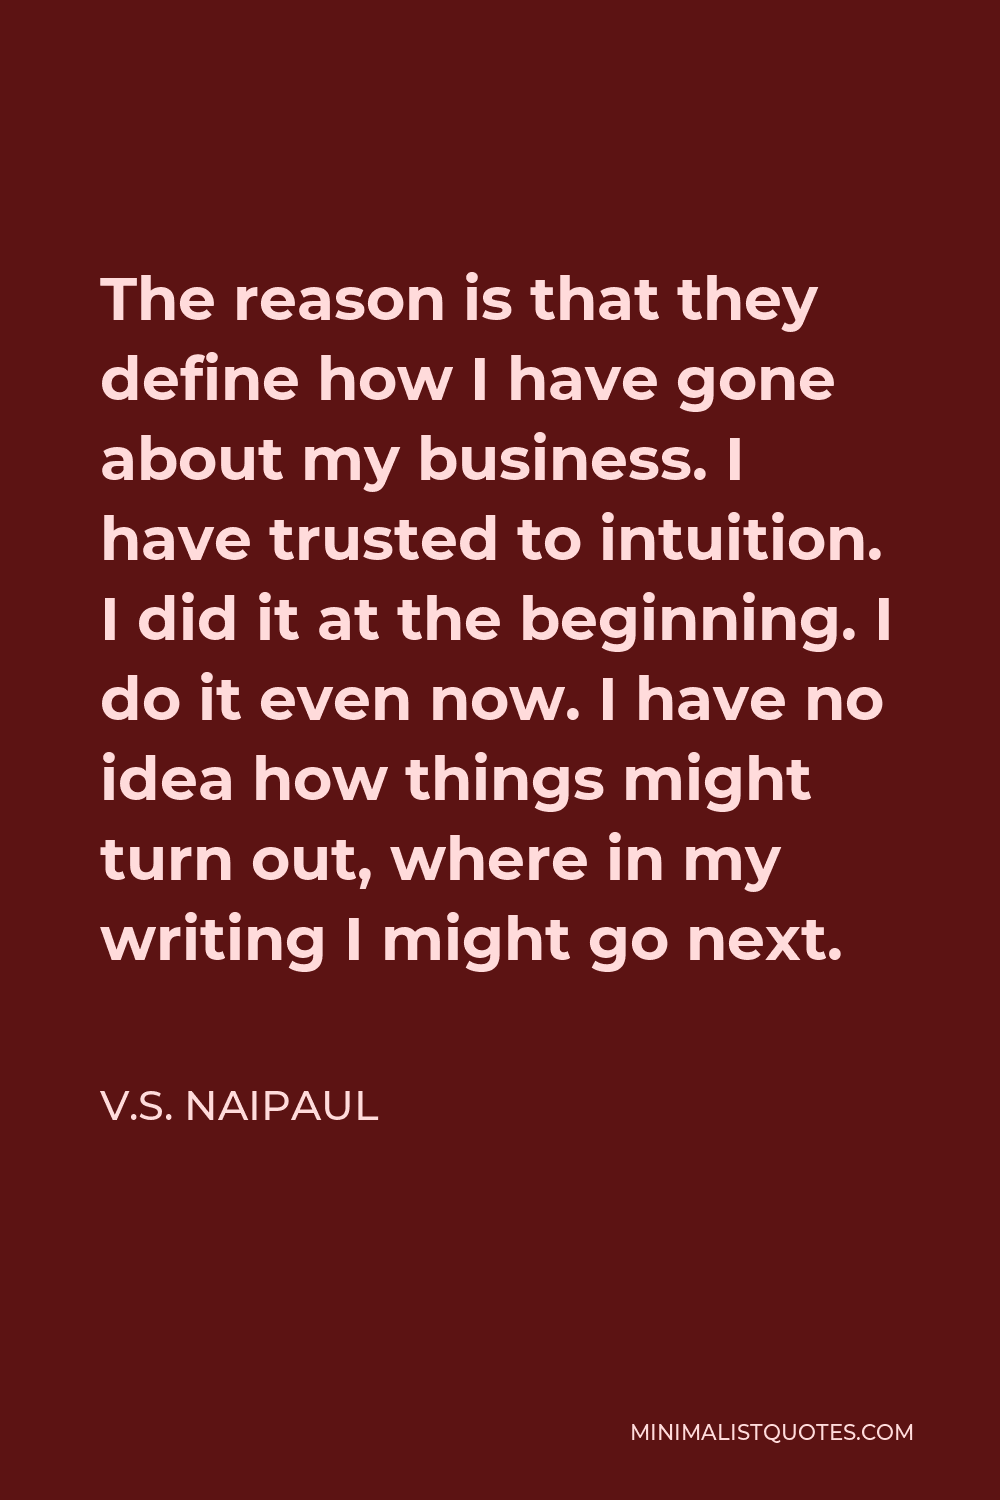 V.S. Naipaul Quote - The reason is that they define how I have gone about my business. I have trusted to intuition. I did it at the beginning. I do it even now. I have no idea how things might turn out, where in my writing I might go next.